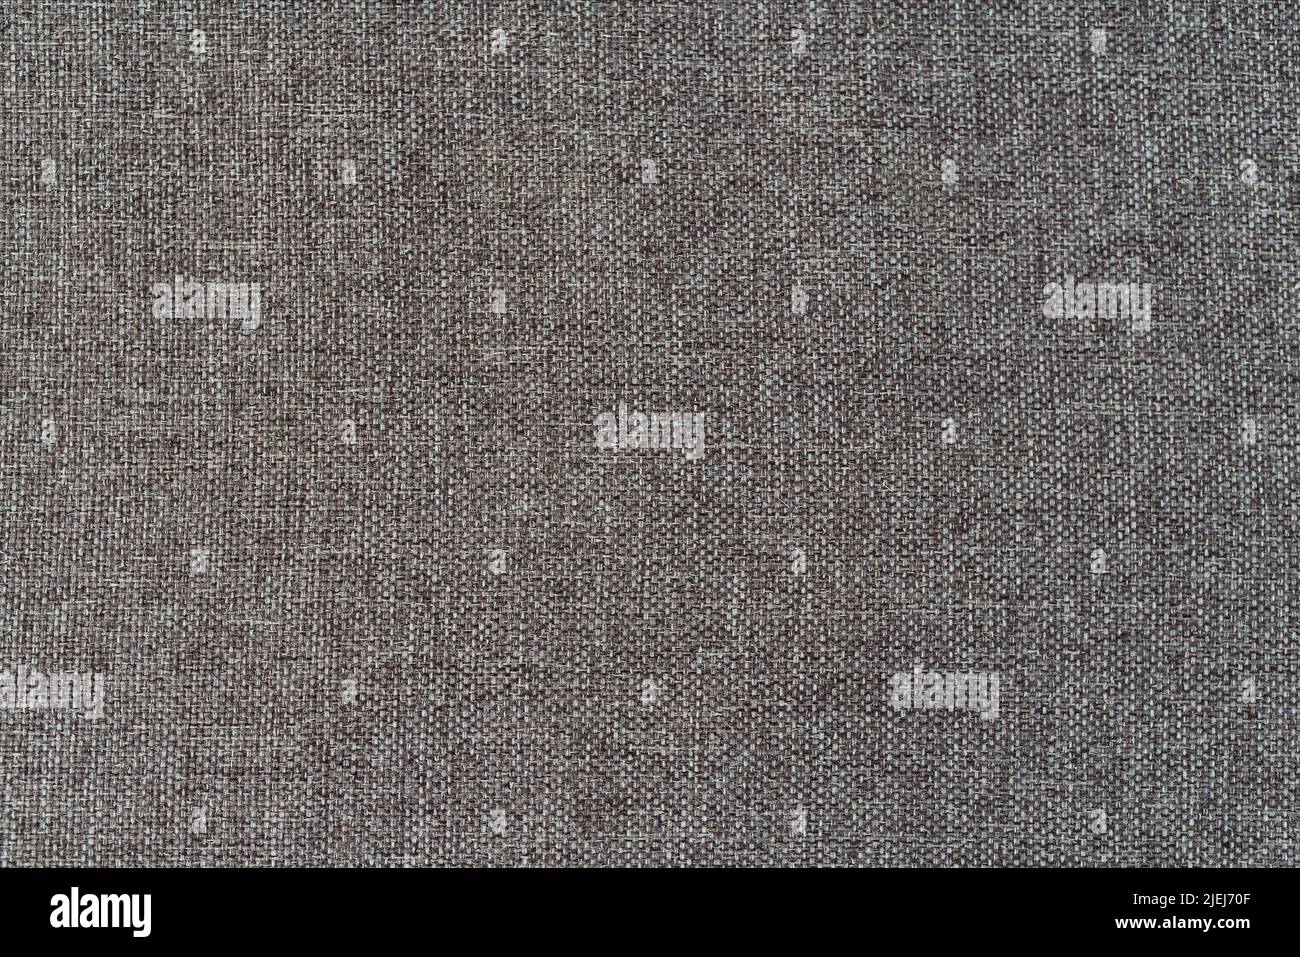 close-up of rough linen fabric, full frame cloth background Stock Photo